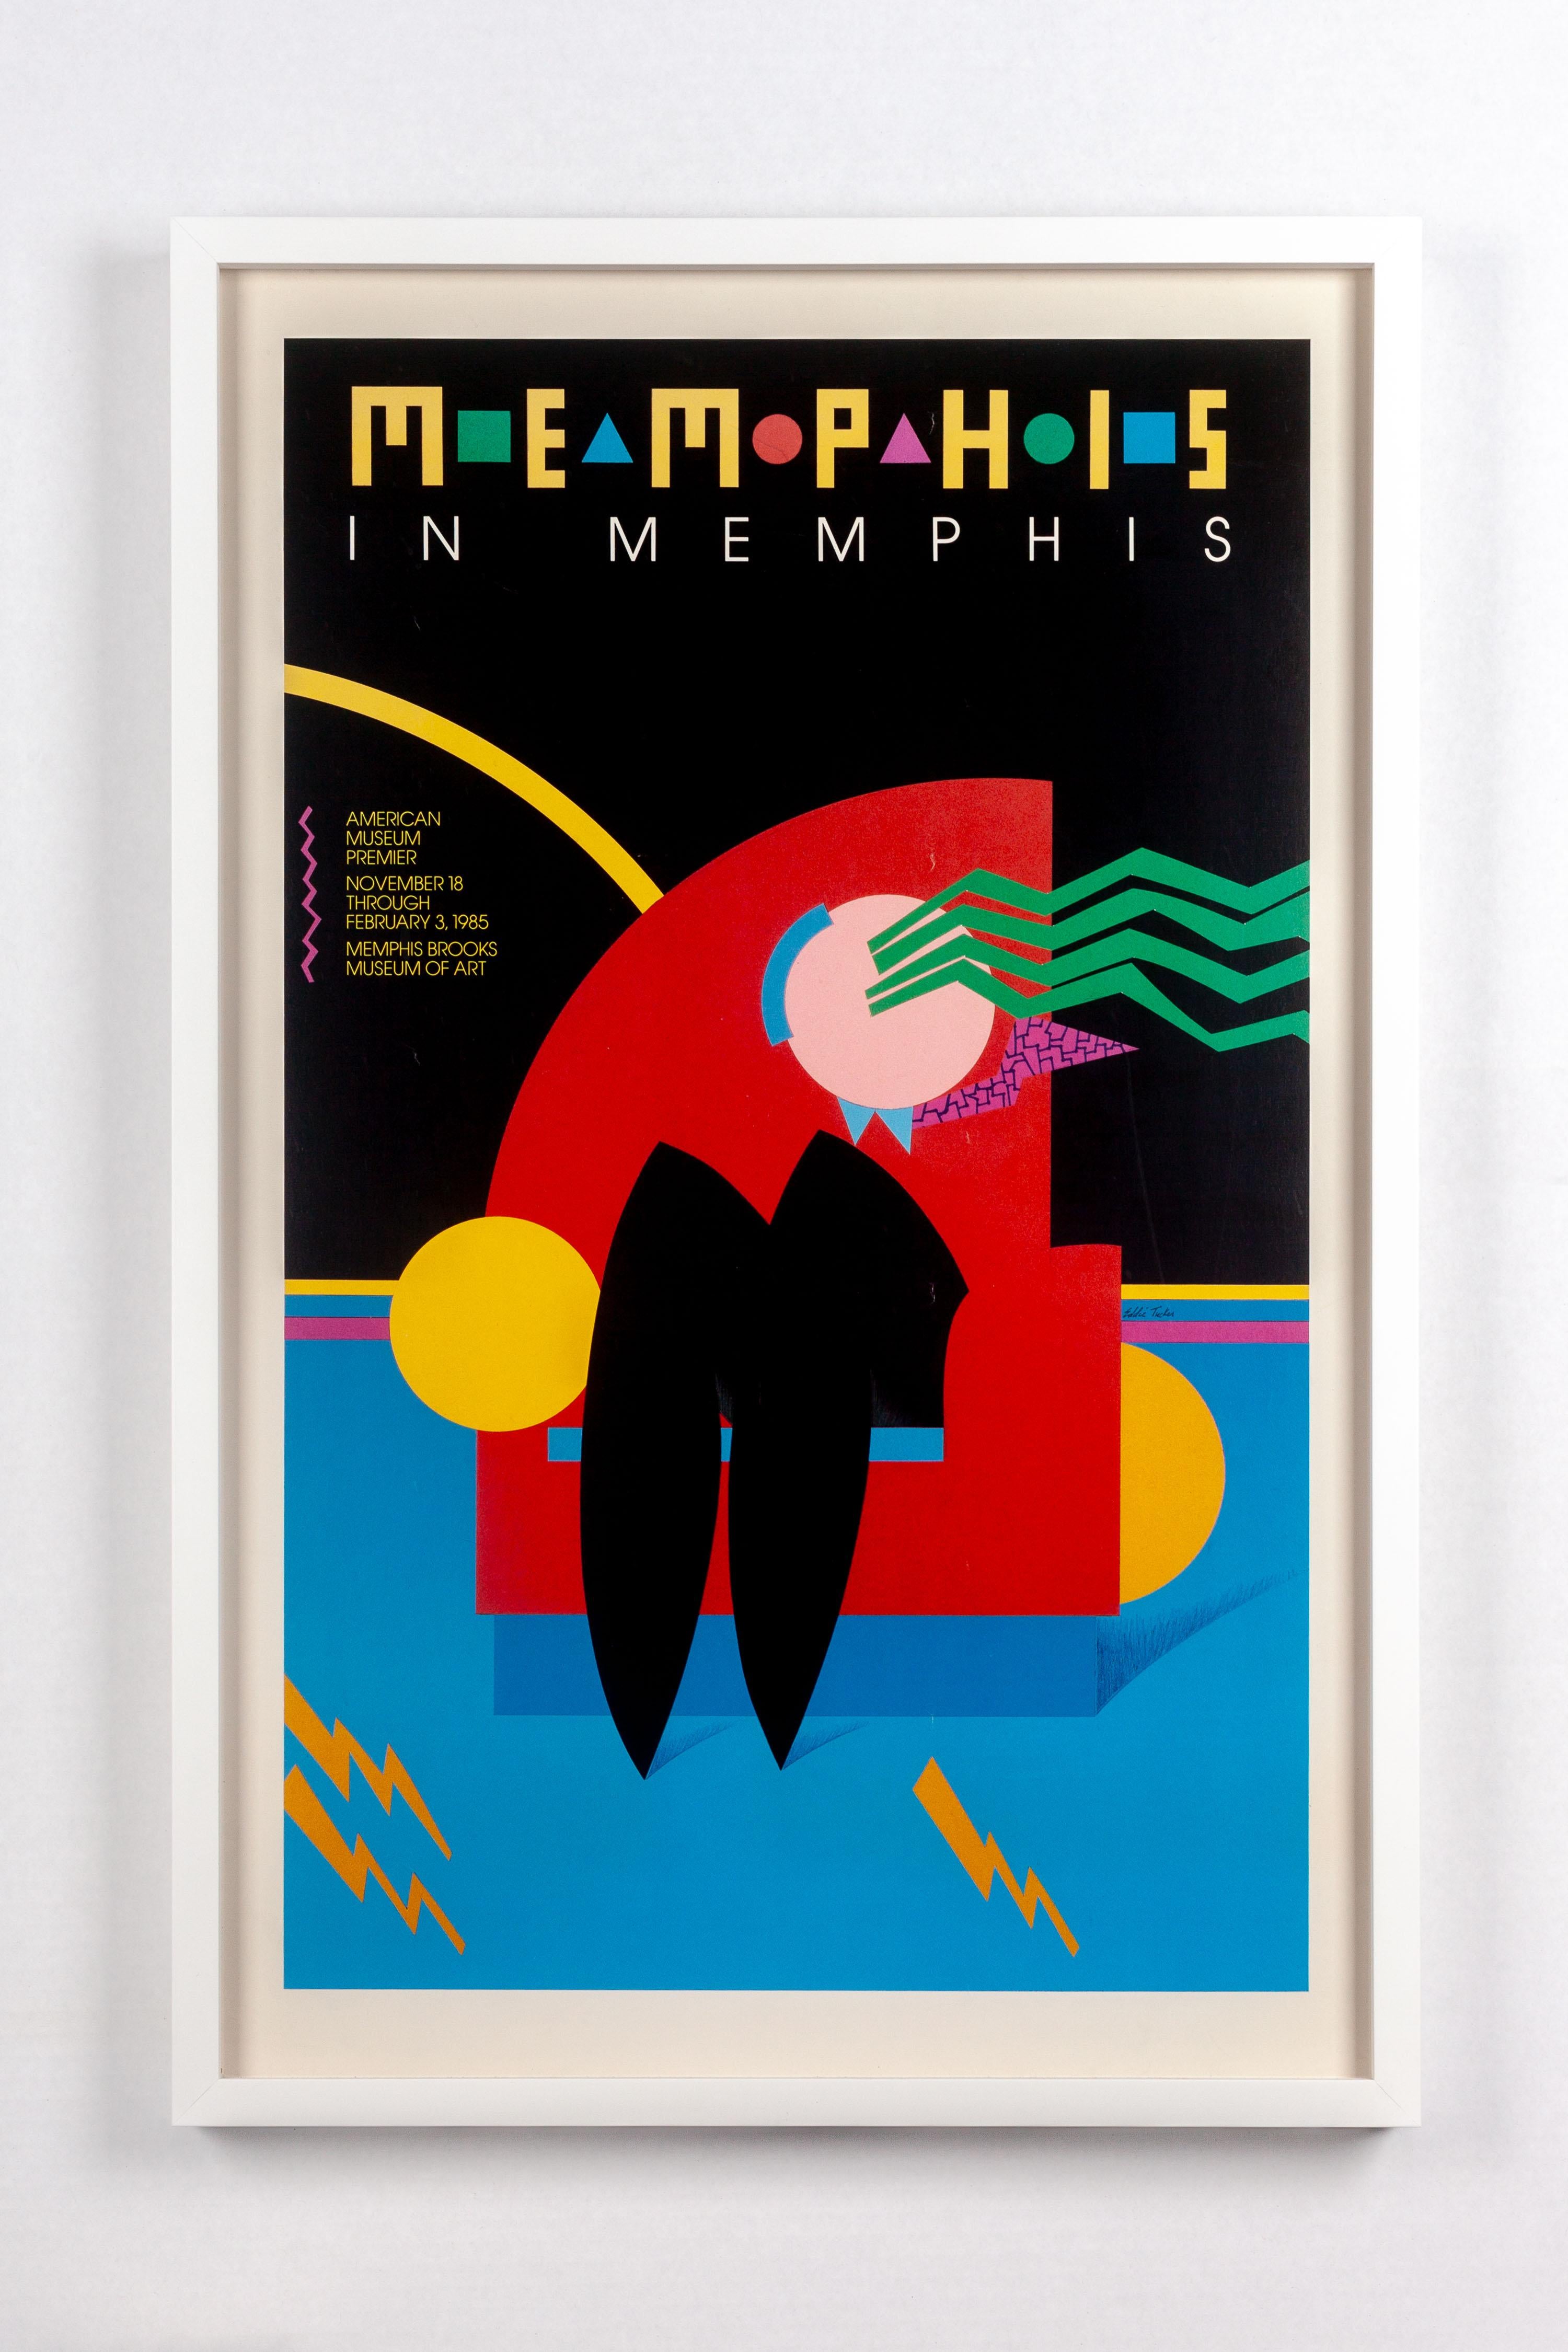 Poster designed by Eddie Tucker for the Memphis Group exhibition 